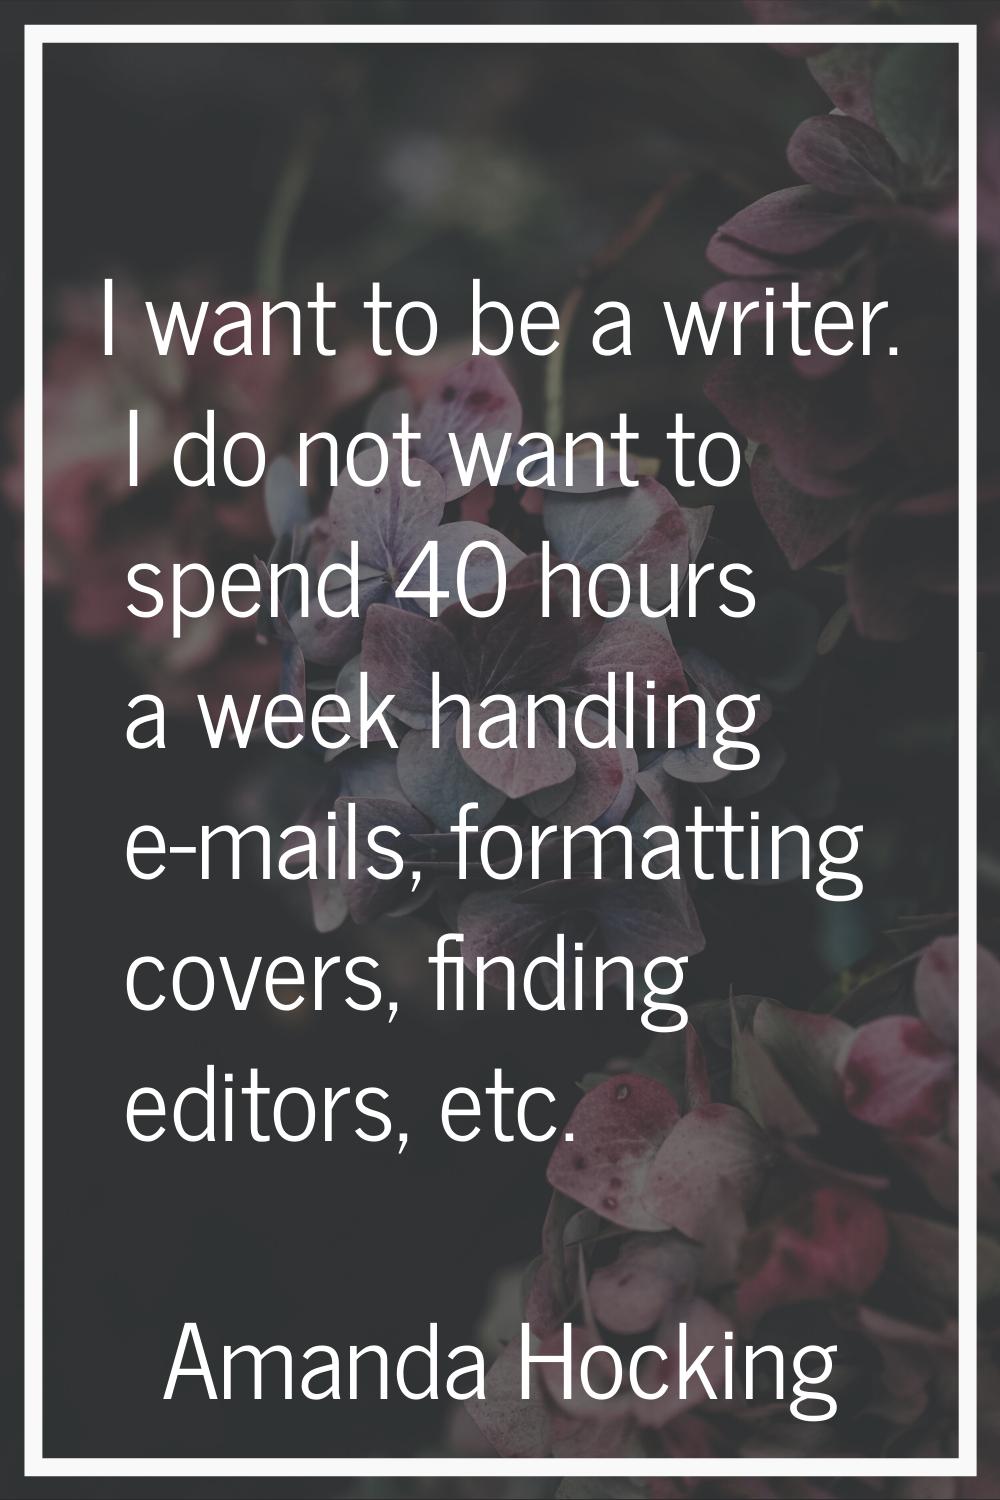 I want to be a writer. I do not want to spend 40 hours a week handling e-mails, formatting covers, 